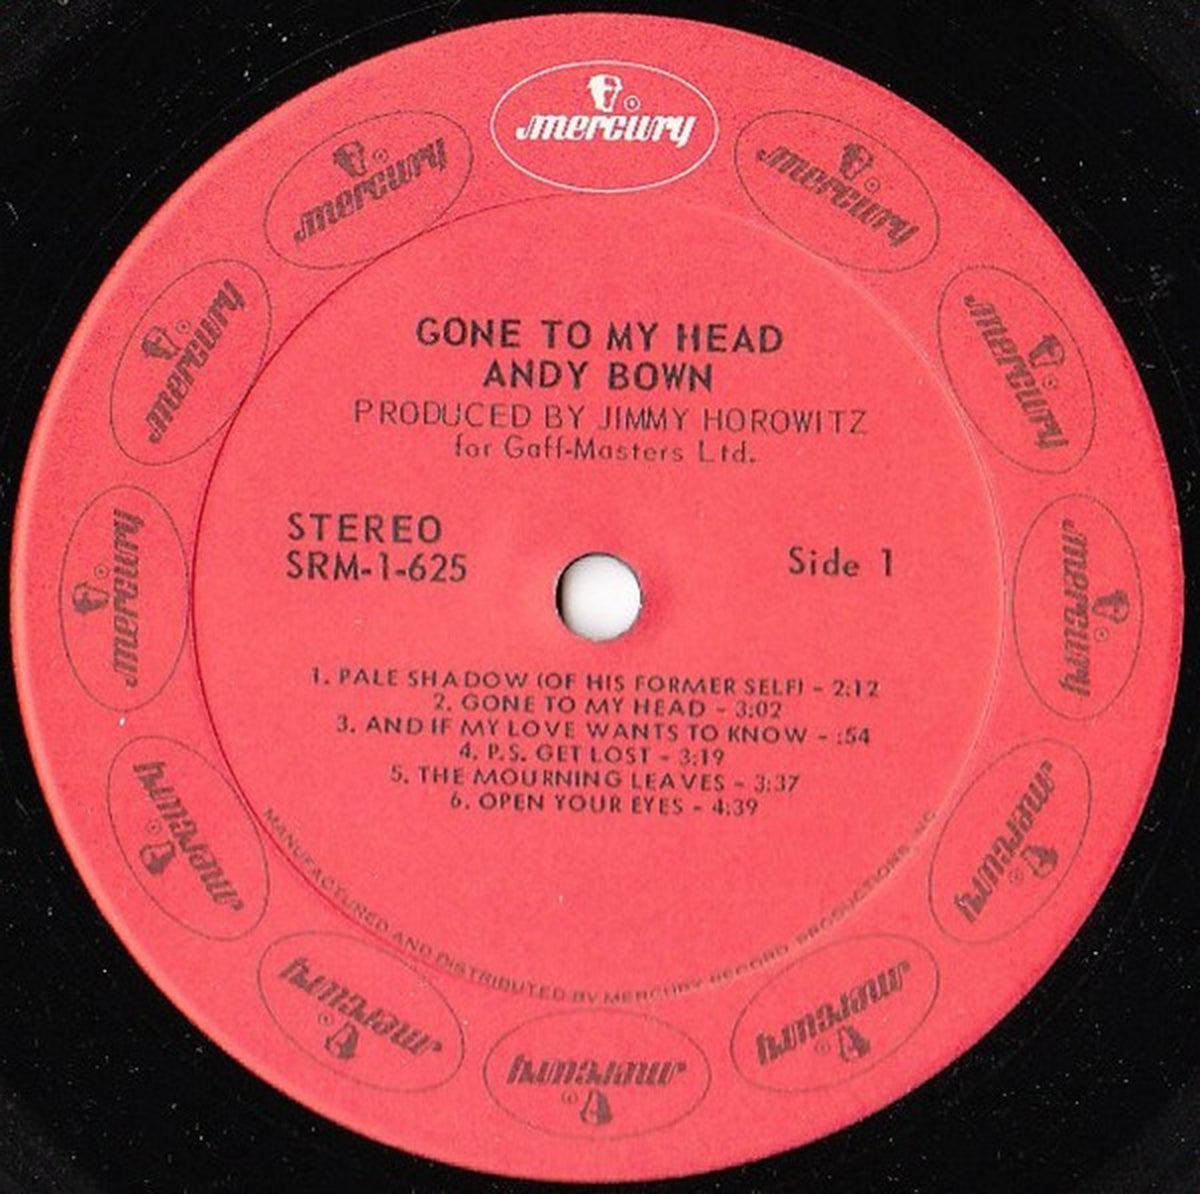 Andy Bown – Gone To My Head - 1972 US Pressing